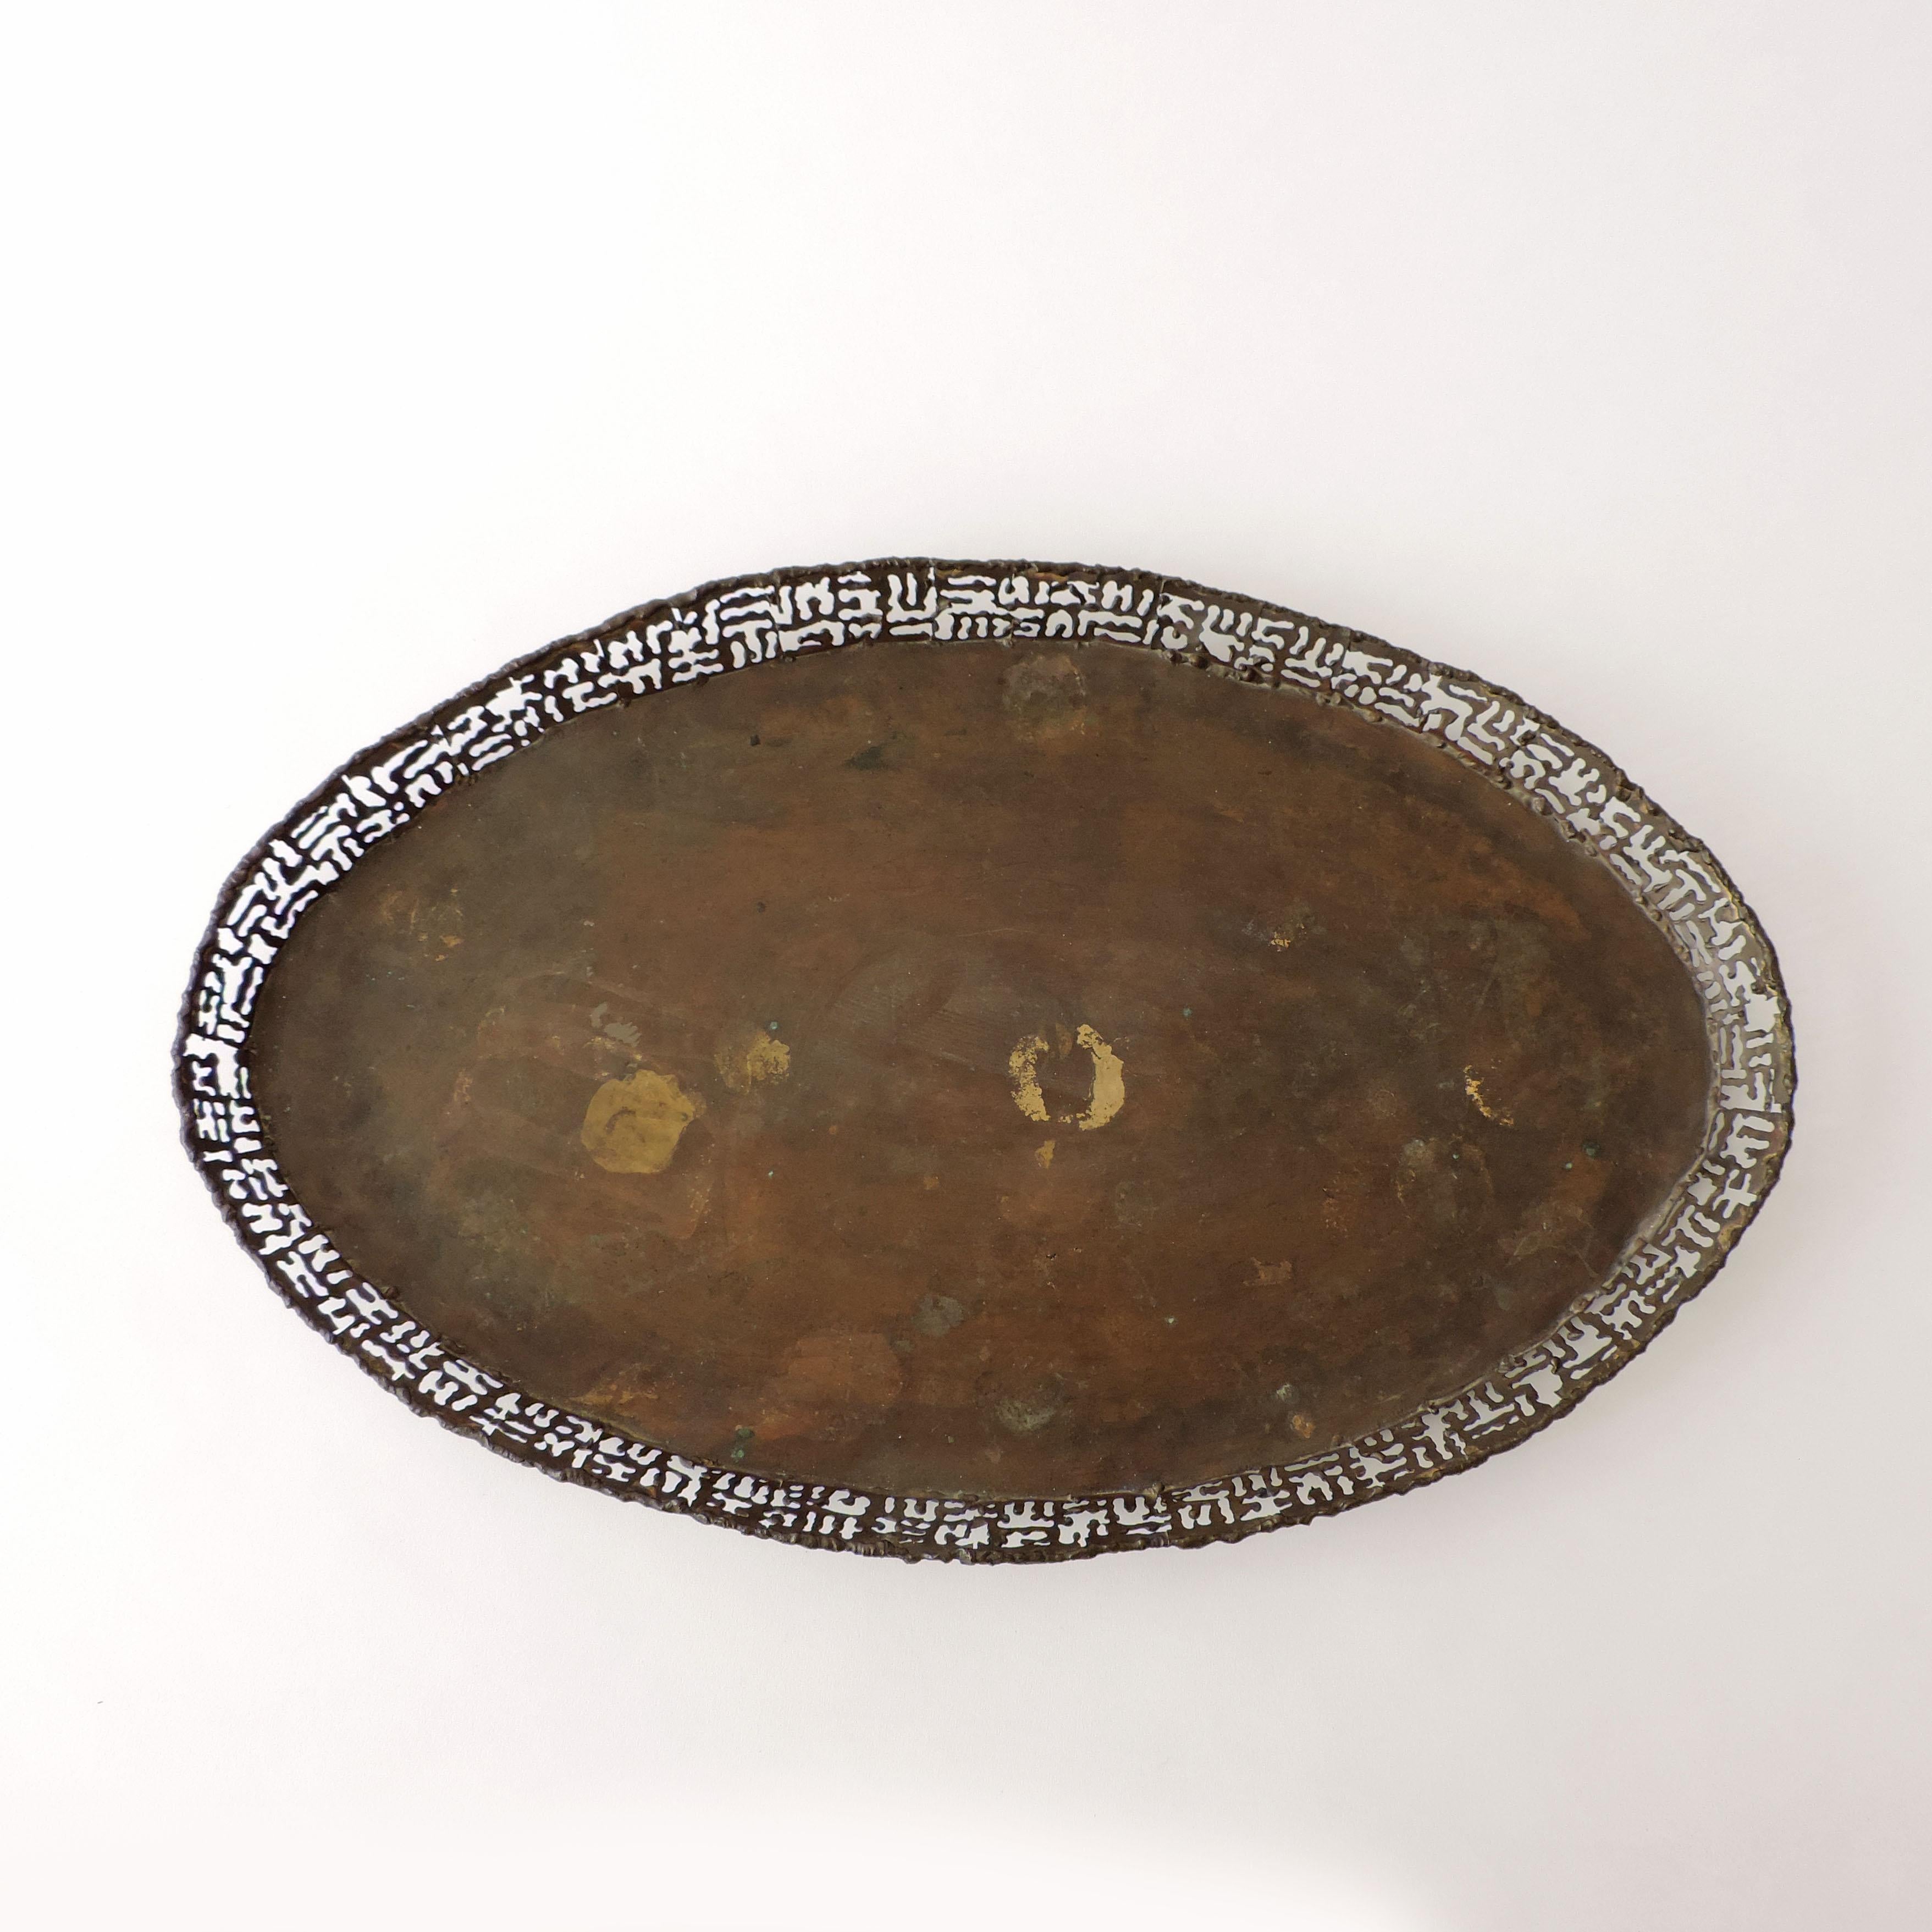 Marcello Fantoni torch cut and welded metal tray, Italy 1960s.